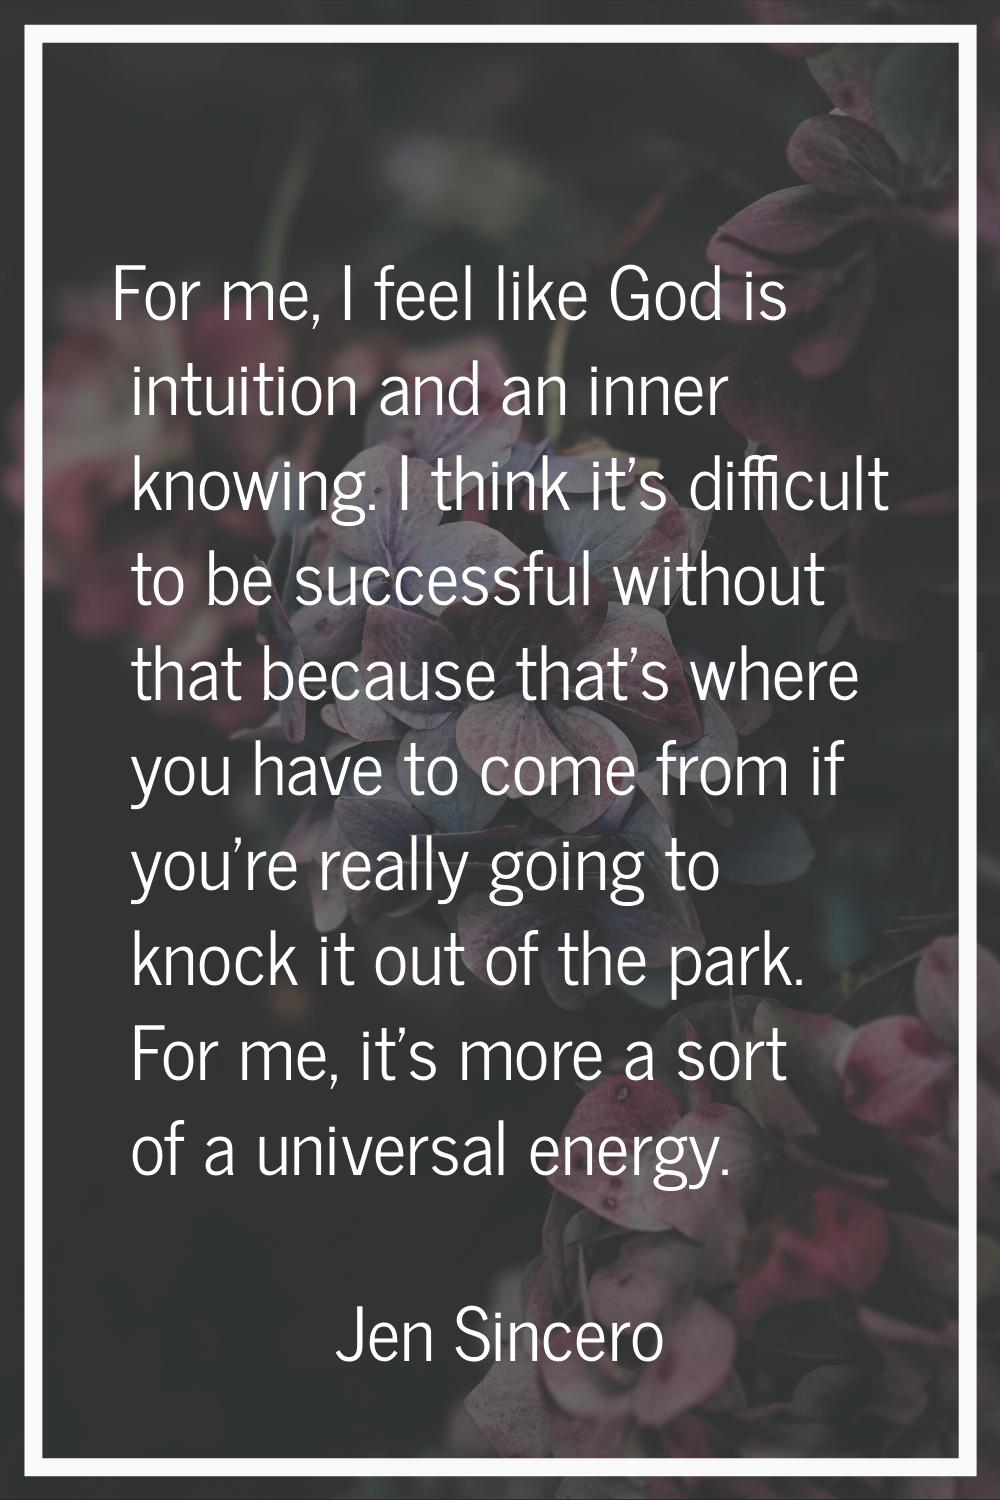 For me, I feel like God is intuition and an inner knowing. I think it's difficult to be successful 